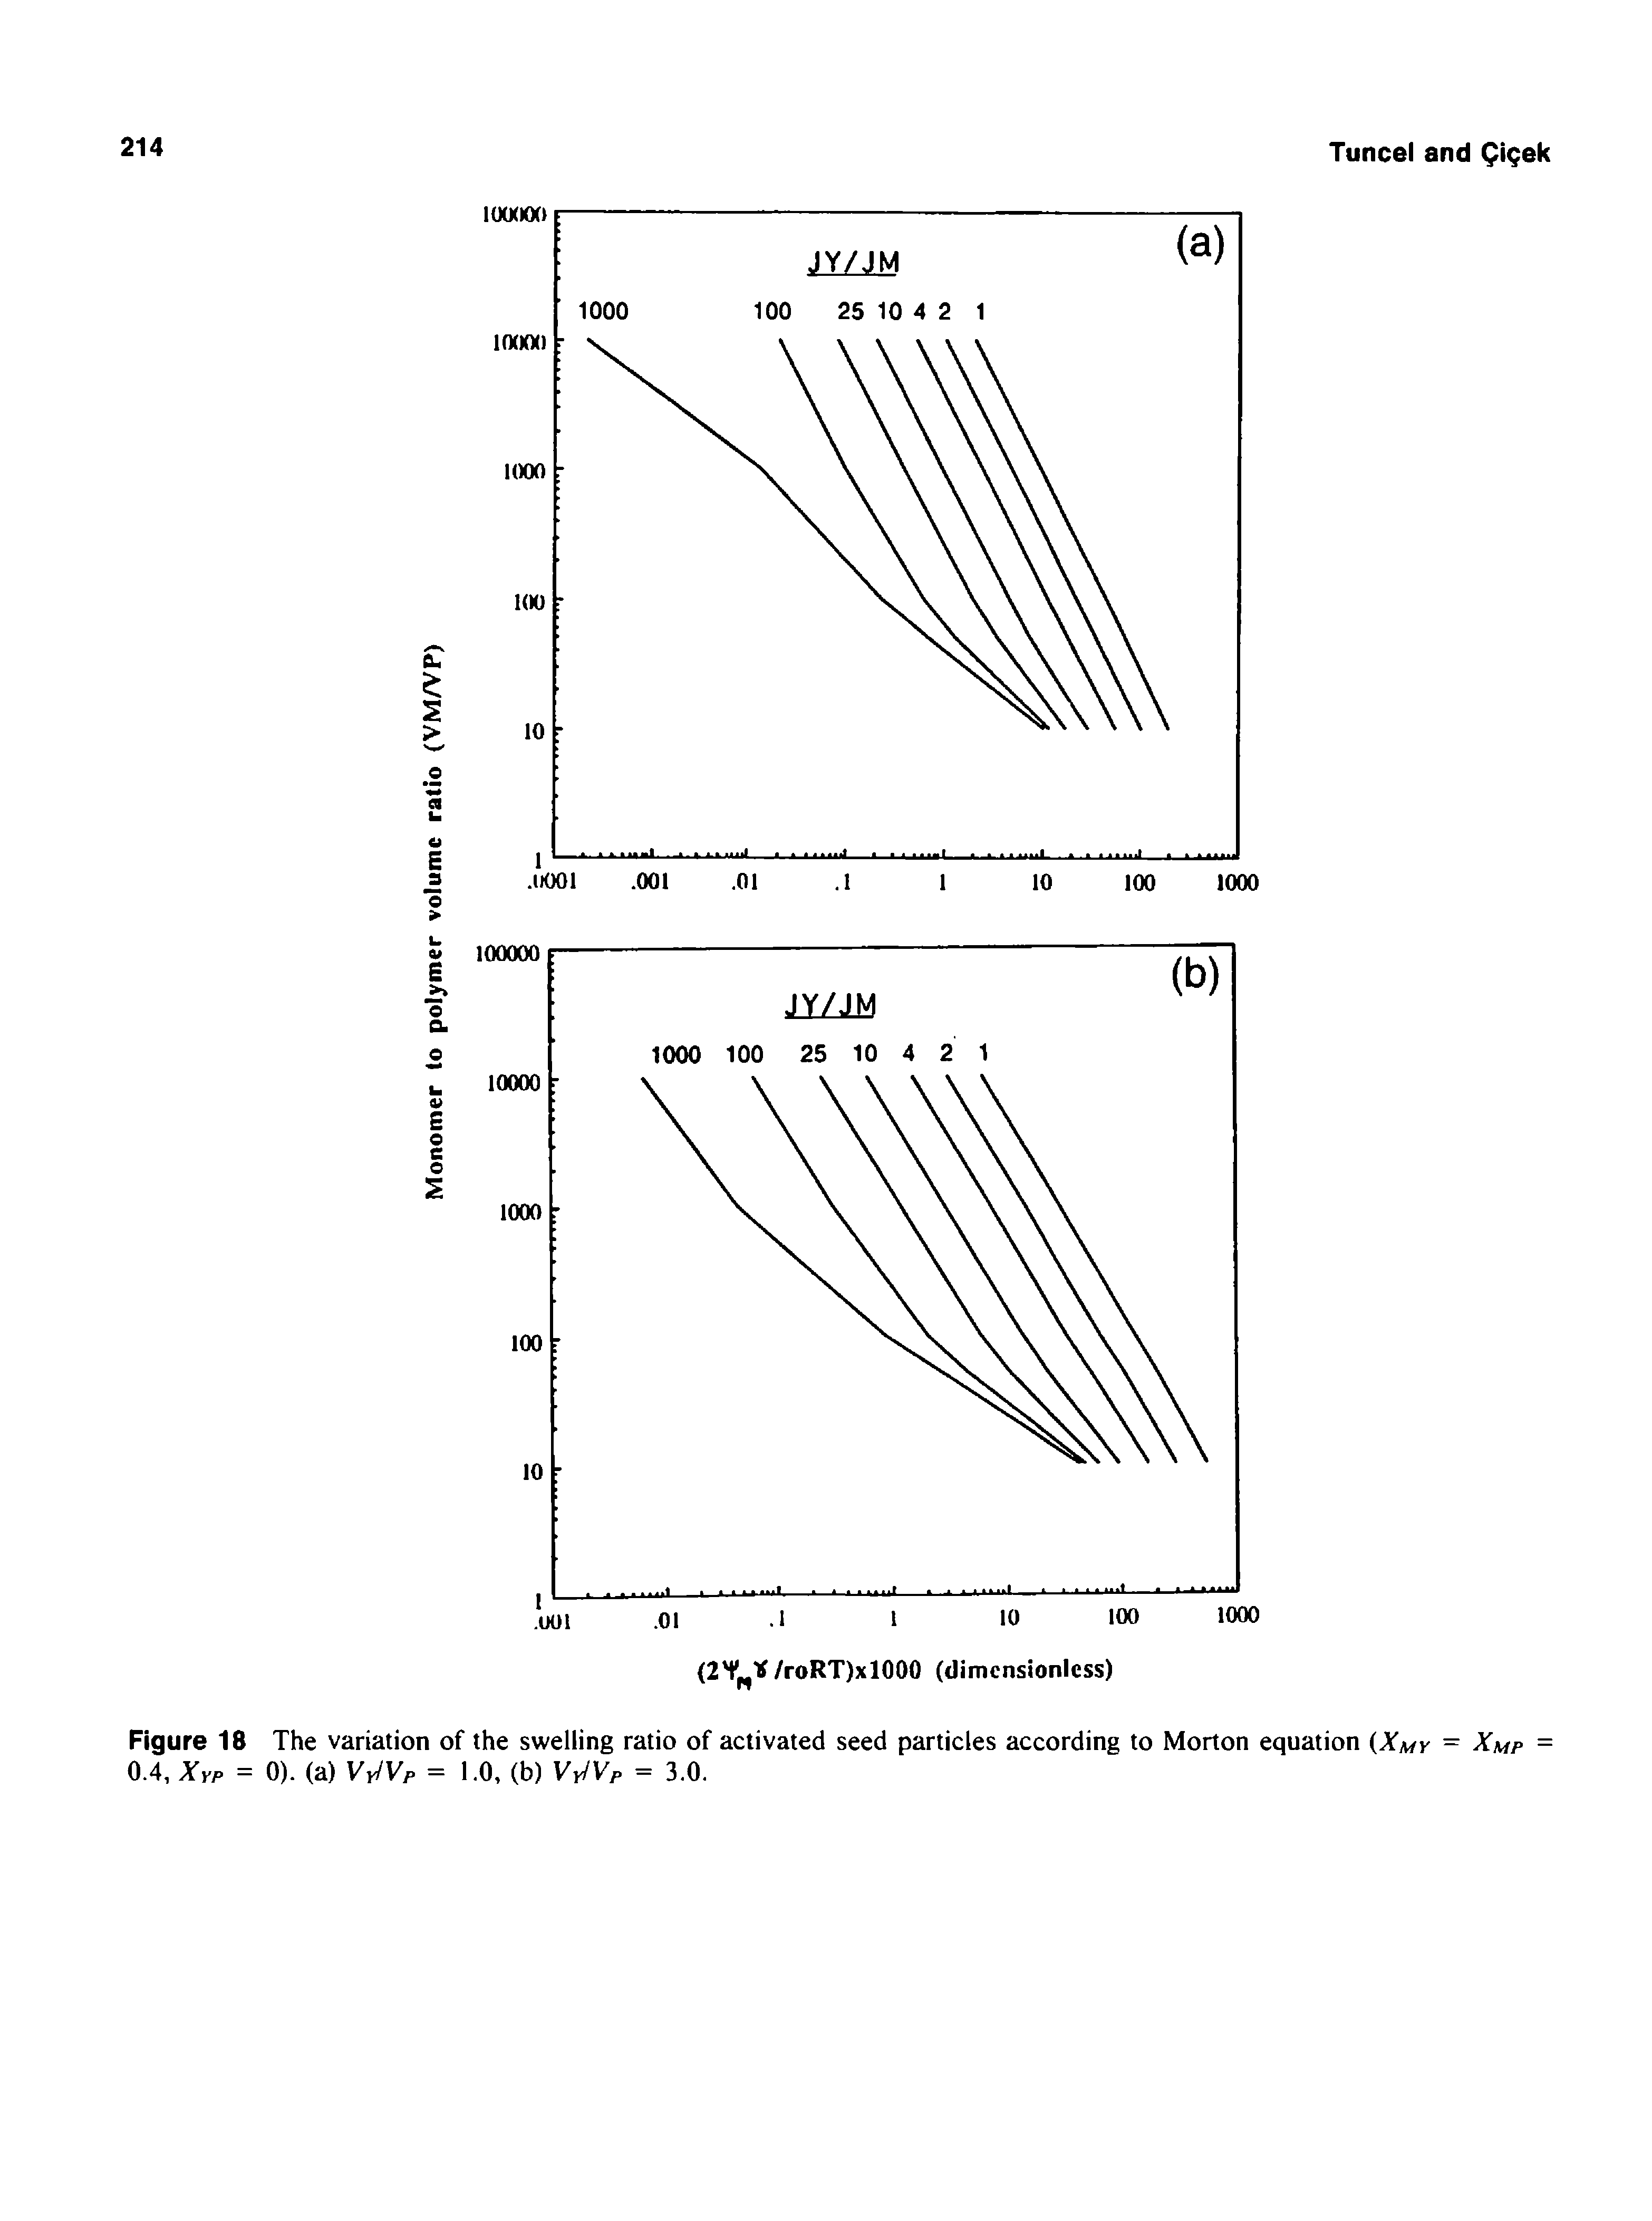 Figure 18 The variation of the swelling ratio of activated seed particles according to Morton equation Xmy 0.4, Xyp = 0). (a) VyIVp = 1.0, (b) VylVp = 3.0.